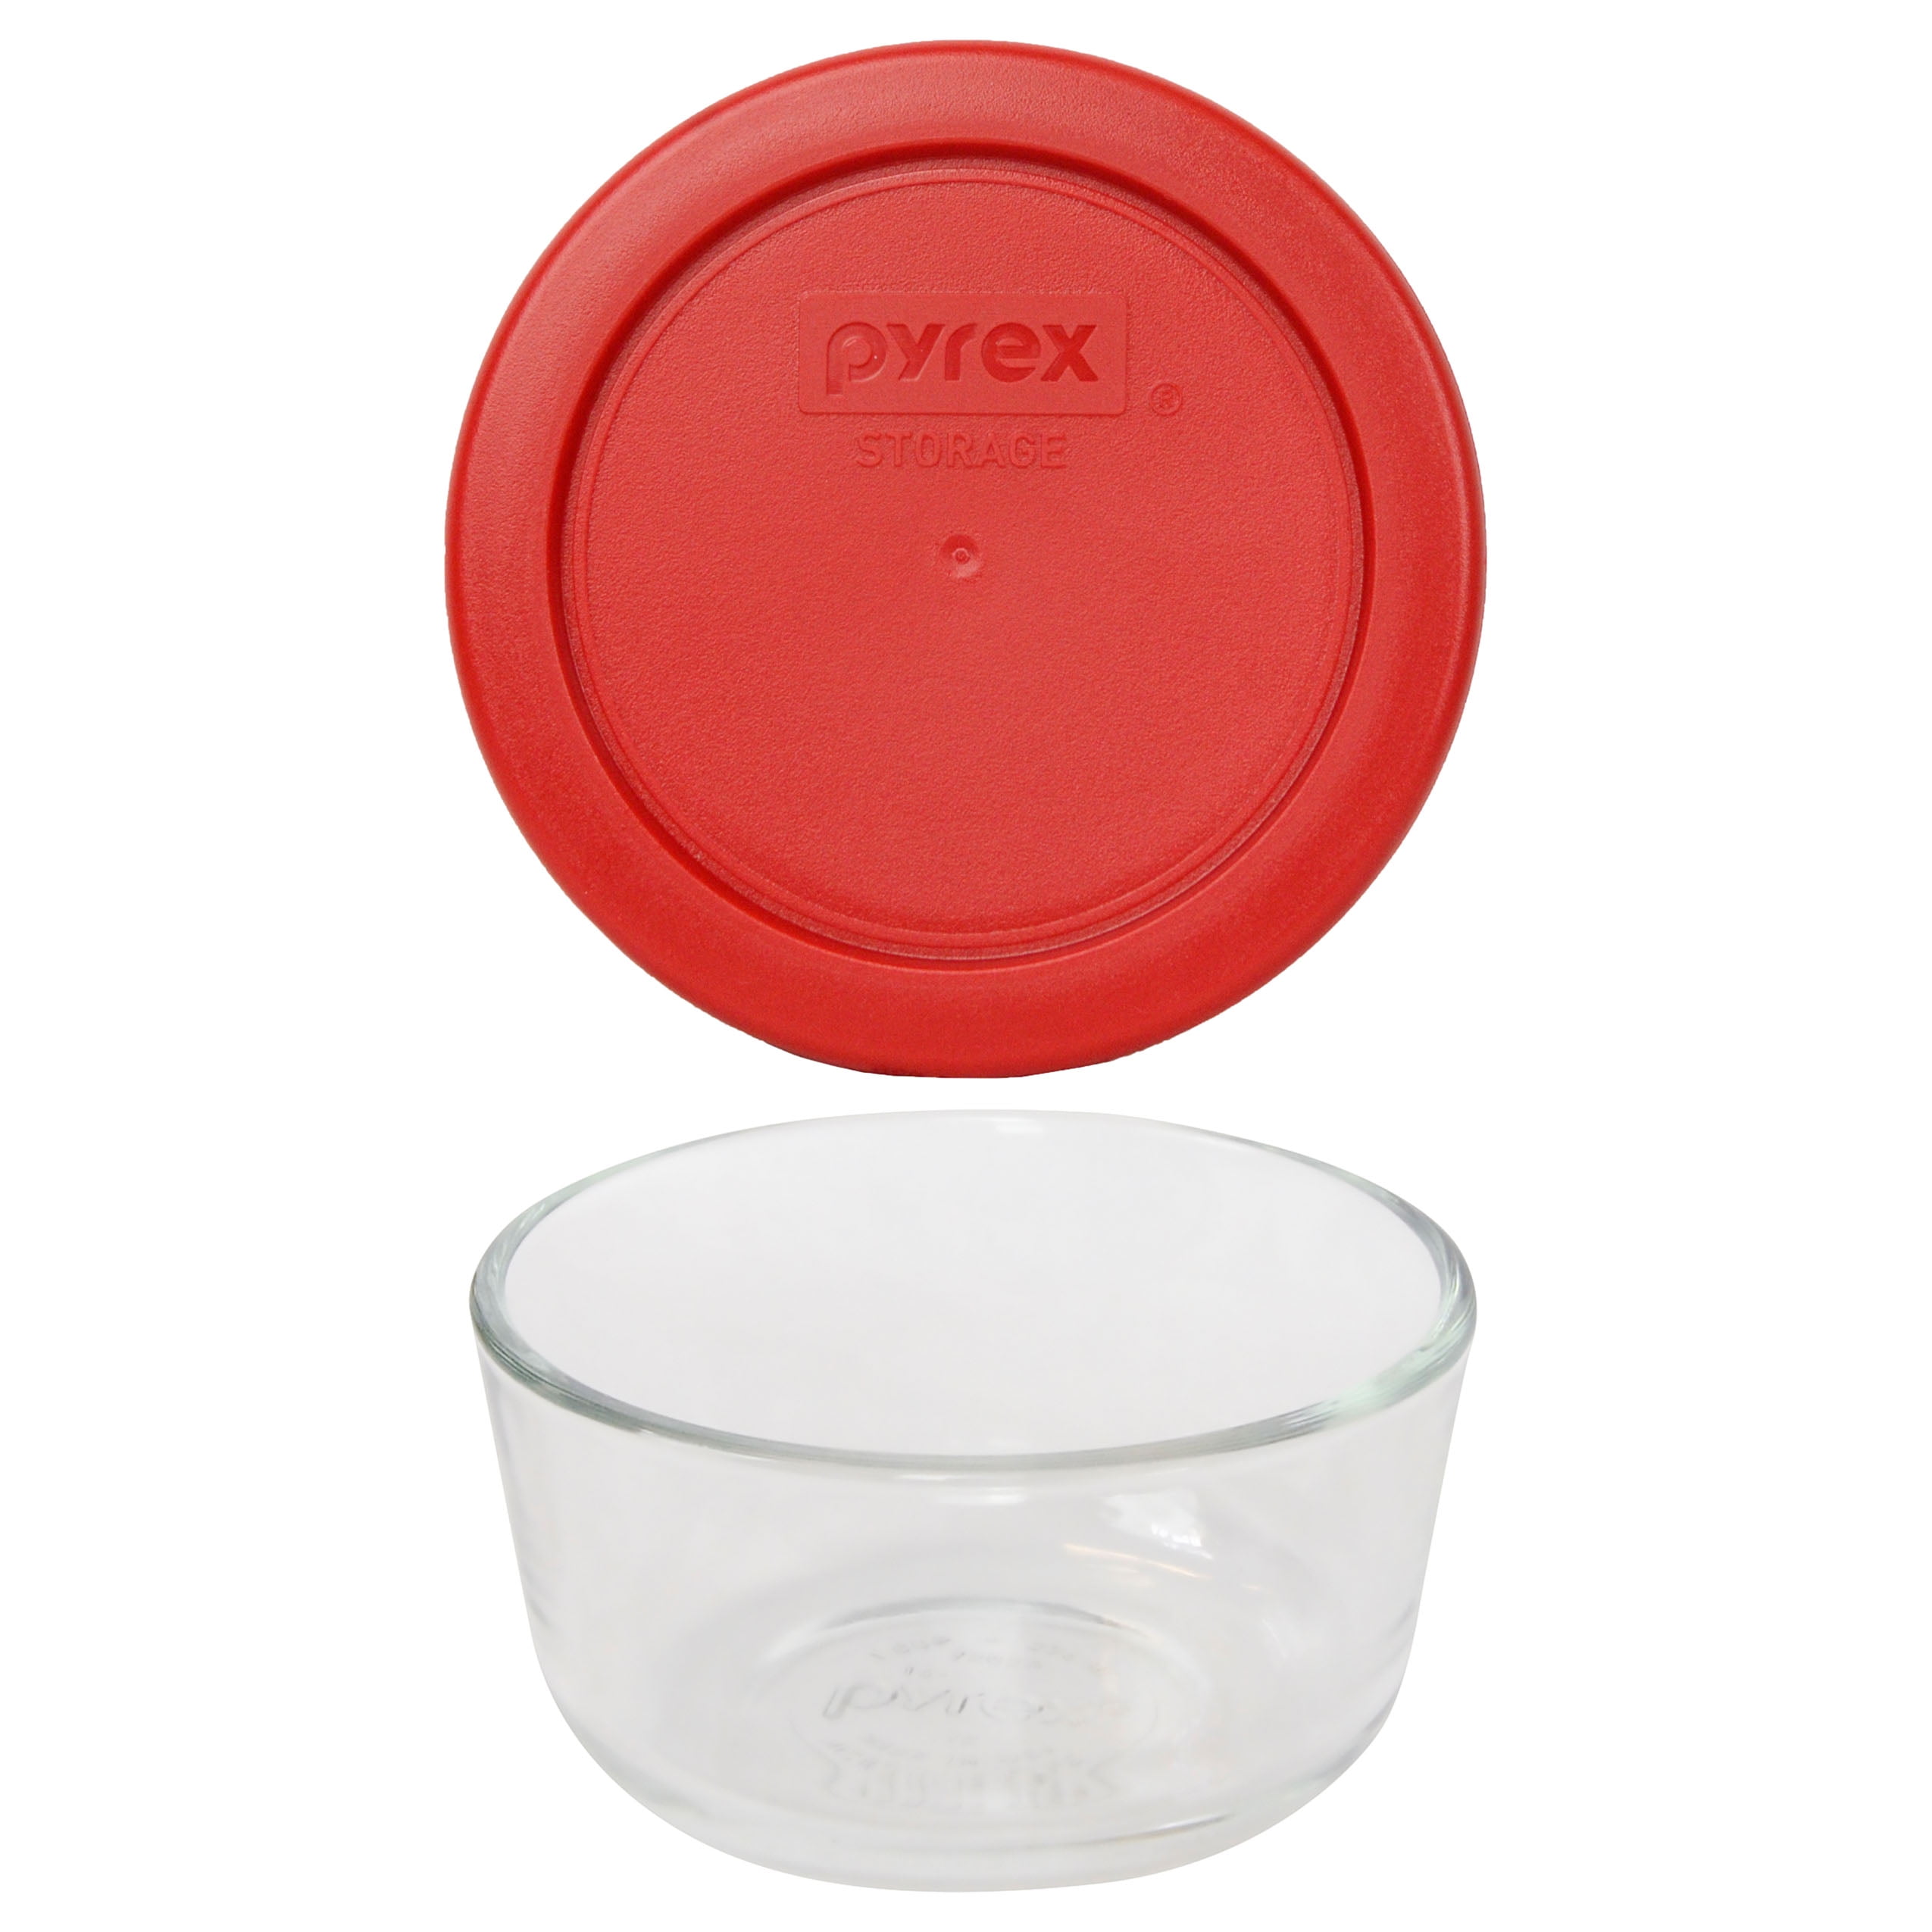 Pyrex 1-Cup Glass Storage Dish with Lid - 8 Piece - Red, 8 Piece - Kroger